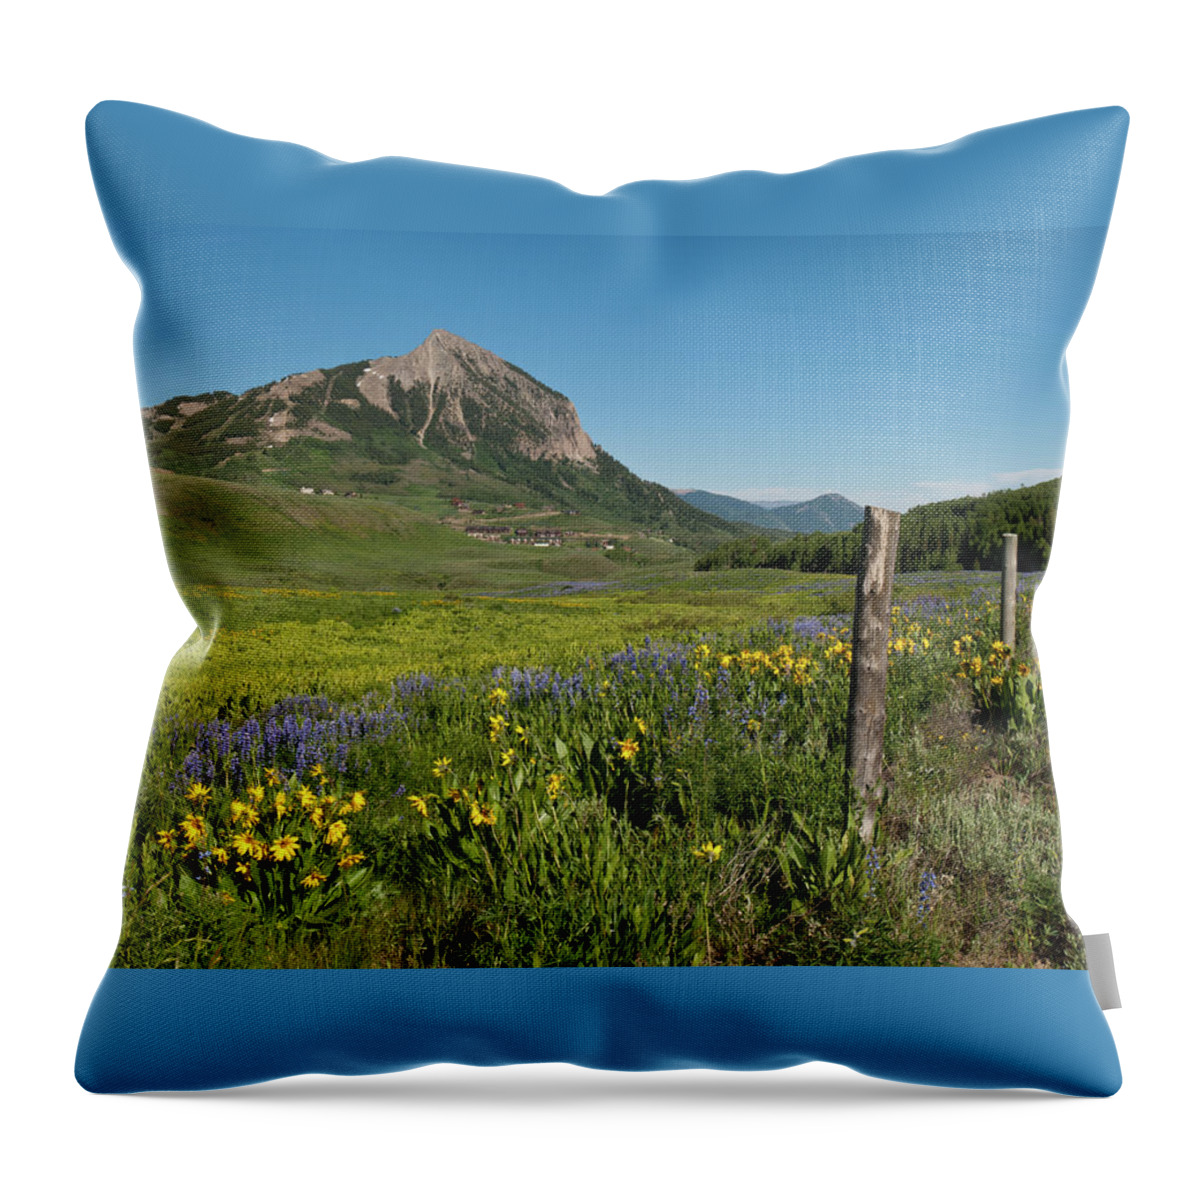 Mount Crested Butte Throw Pillow featuring the photograph Mount Crested Butte Early Evening Summer by Cascade Colors